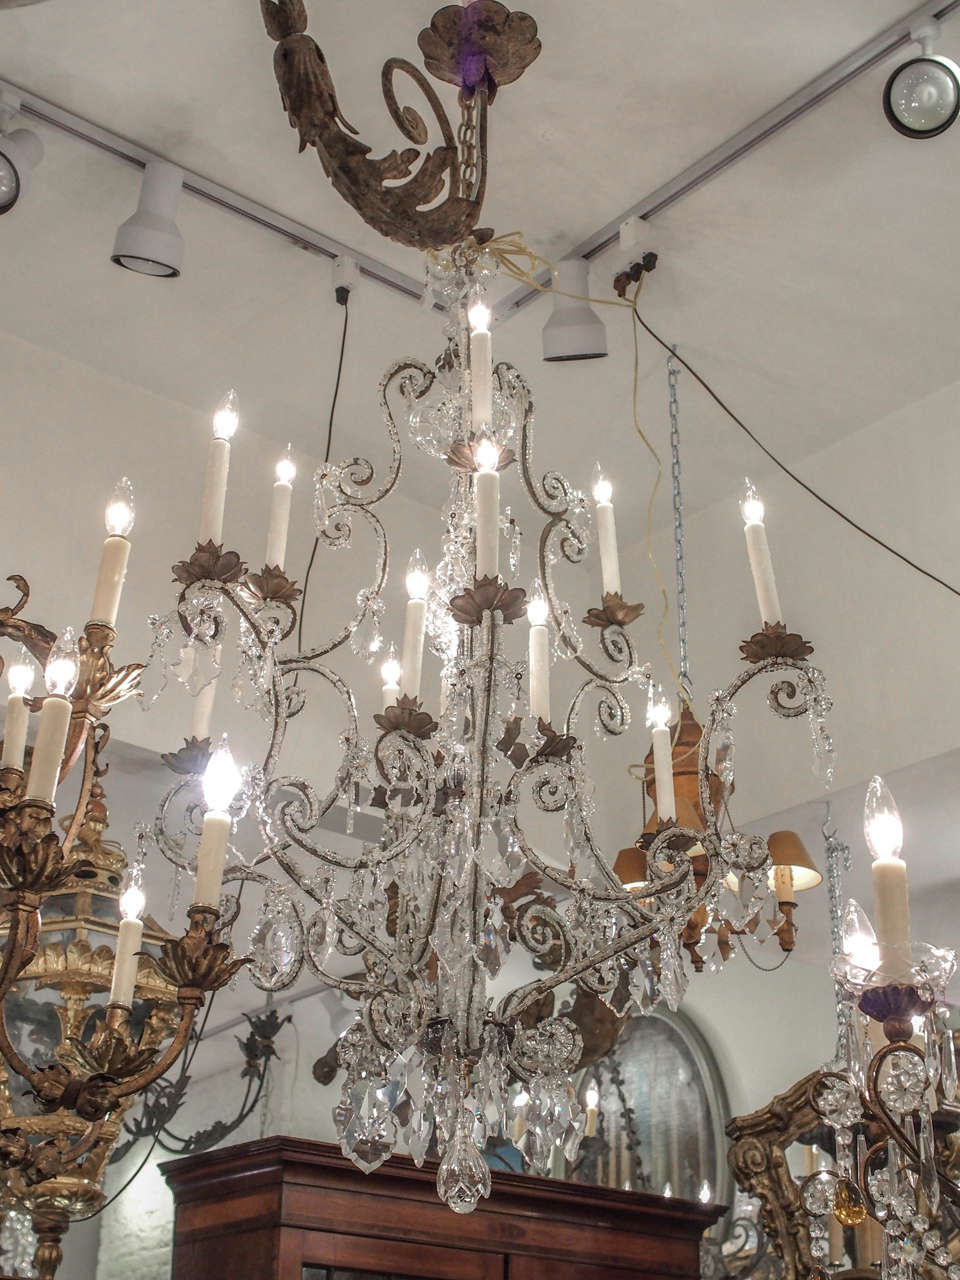 Italian, Venetian, 18th century beaded and cut crystal on an iron frame twelve-light chandelier. We have re wired this fixture and it is wired for us current rated 60 W each arm. We recommend having an electrician check it as wired can come loose in